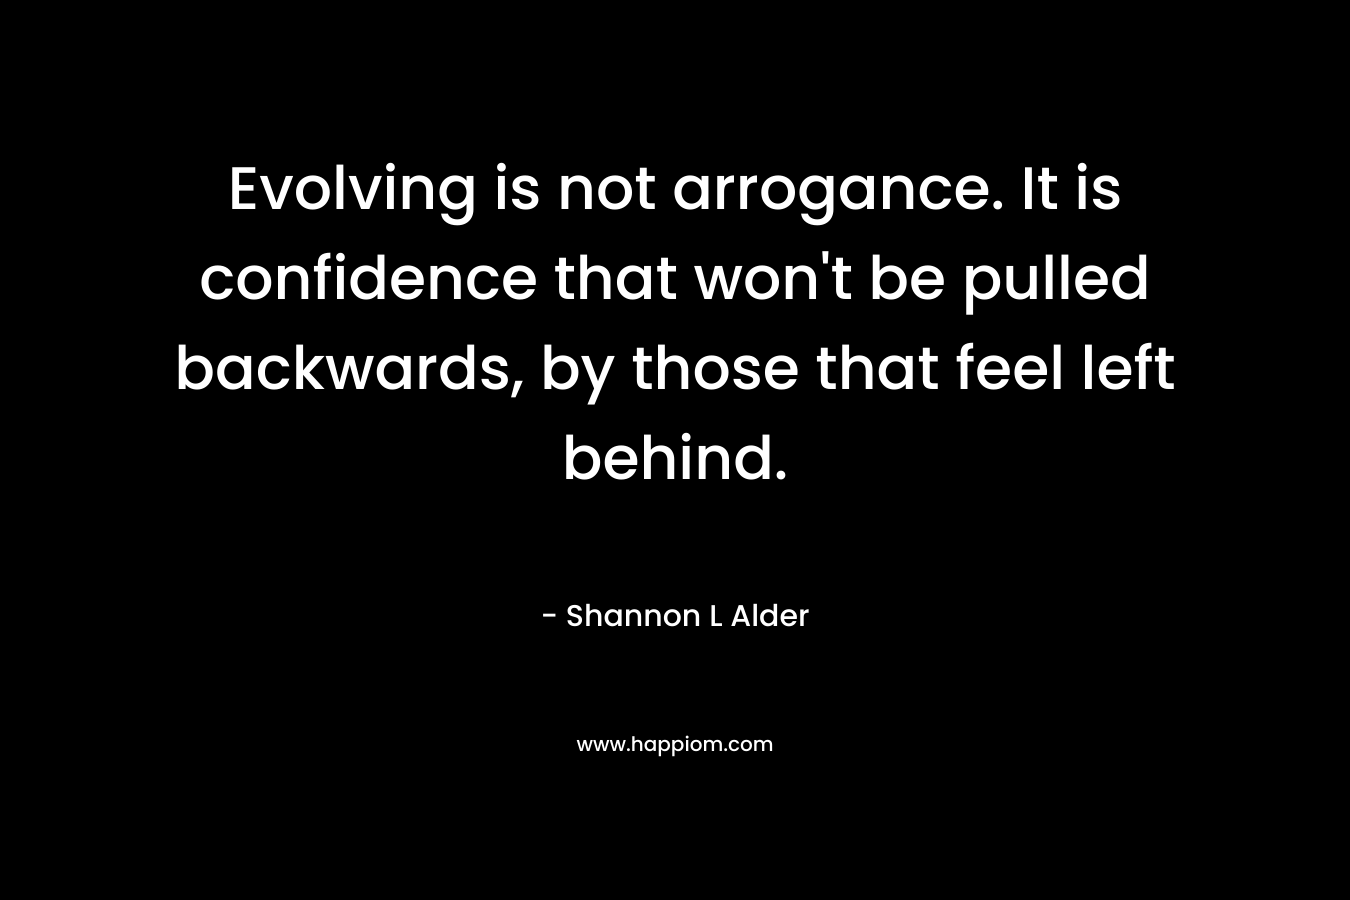 Evolving is not arrogance. It is confidence that won’t be pulled backwards, by those that feel left behind. – Shannon L Alder